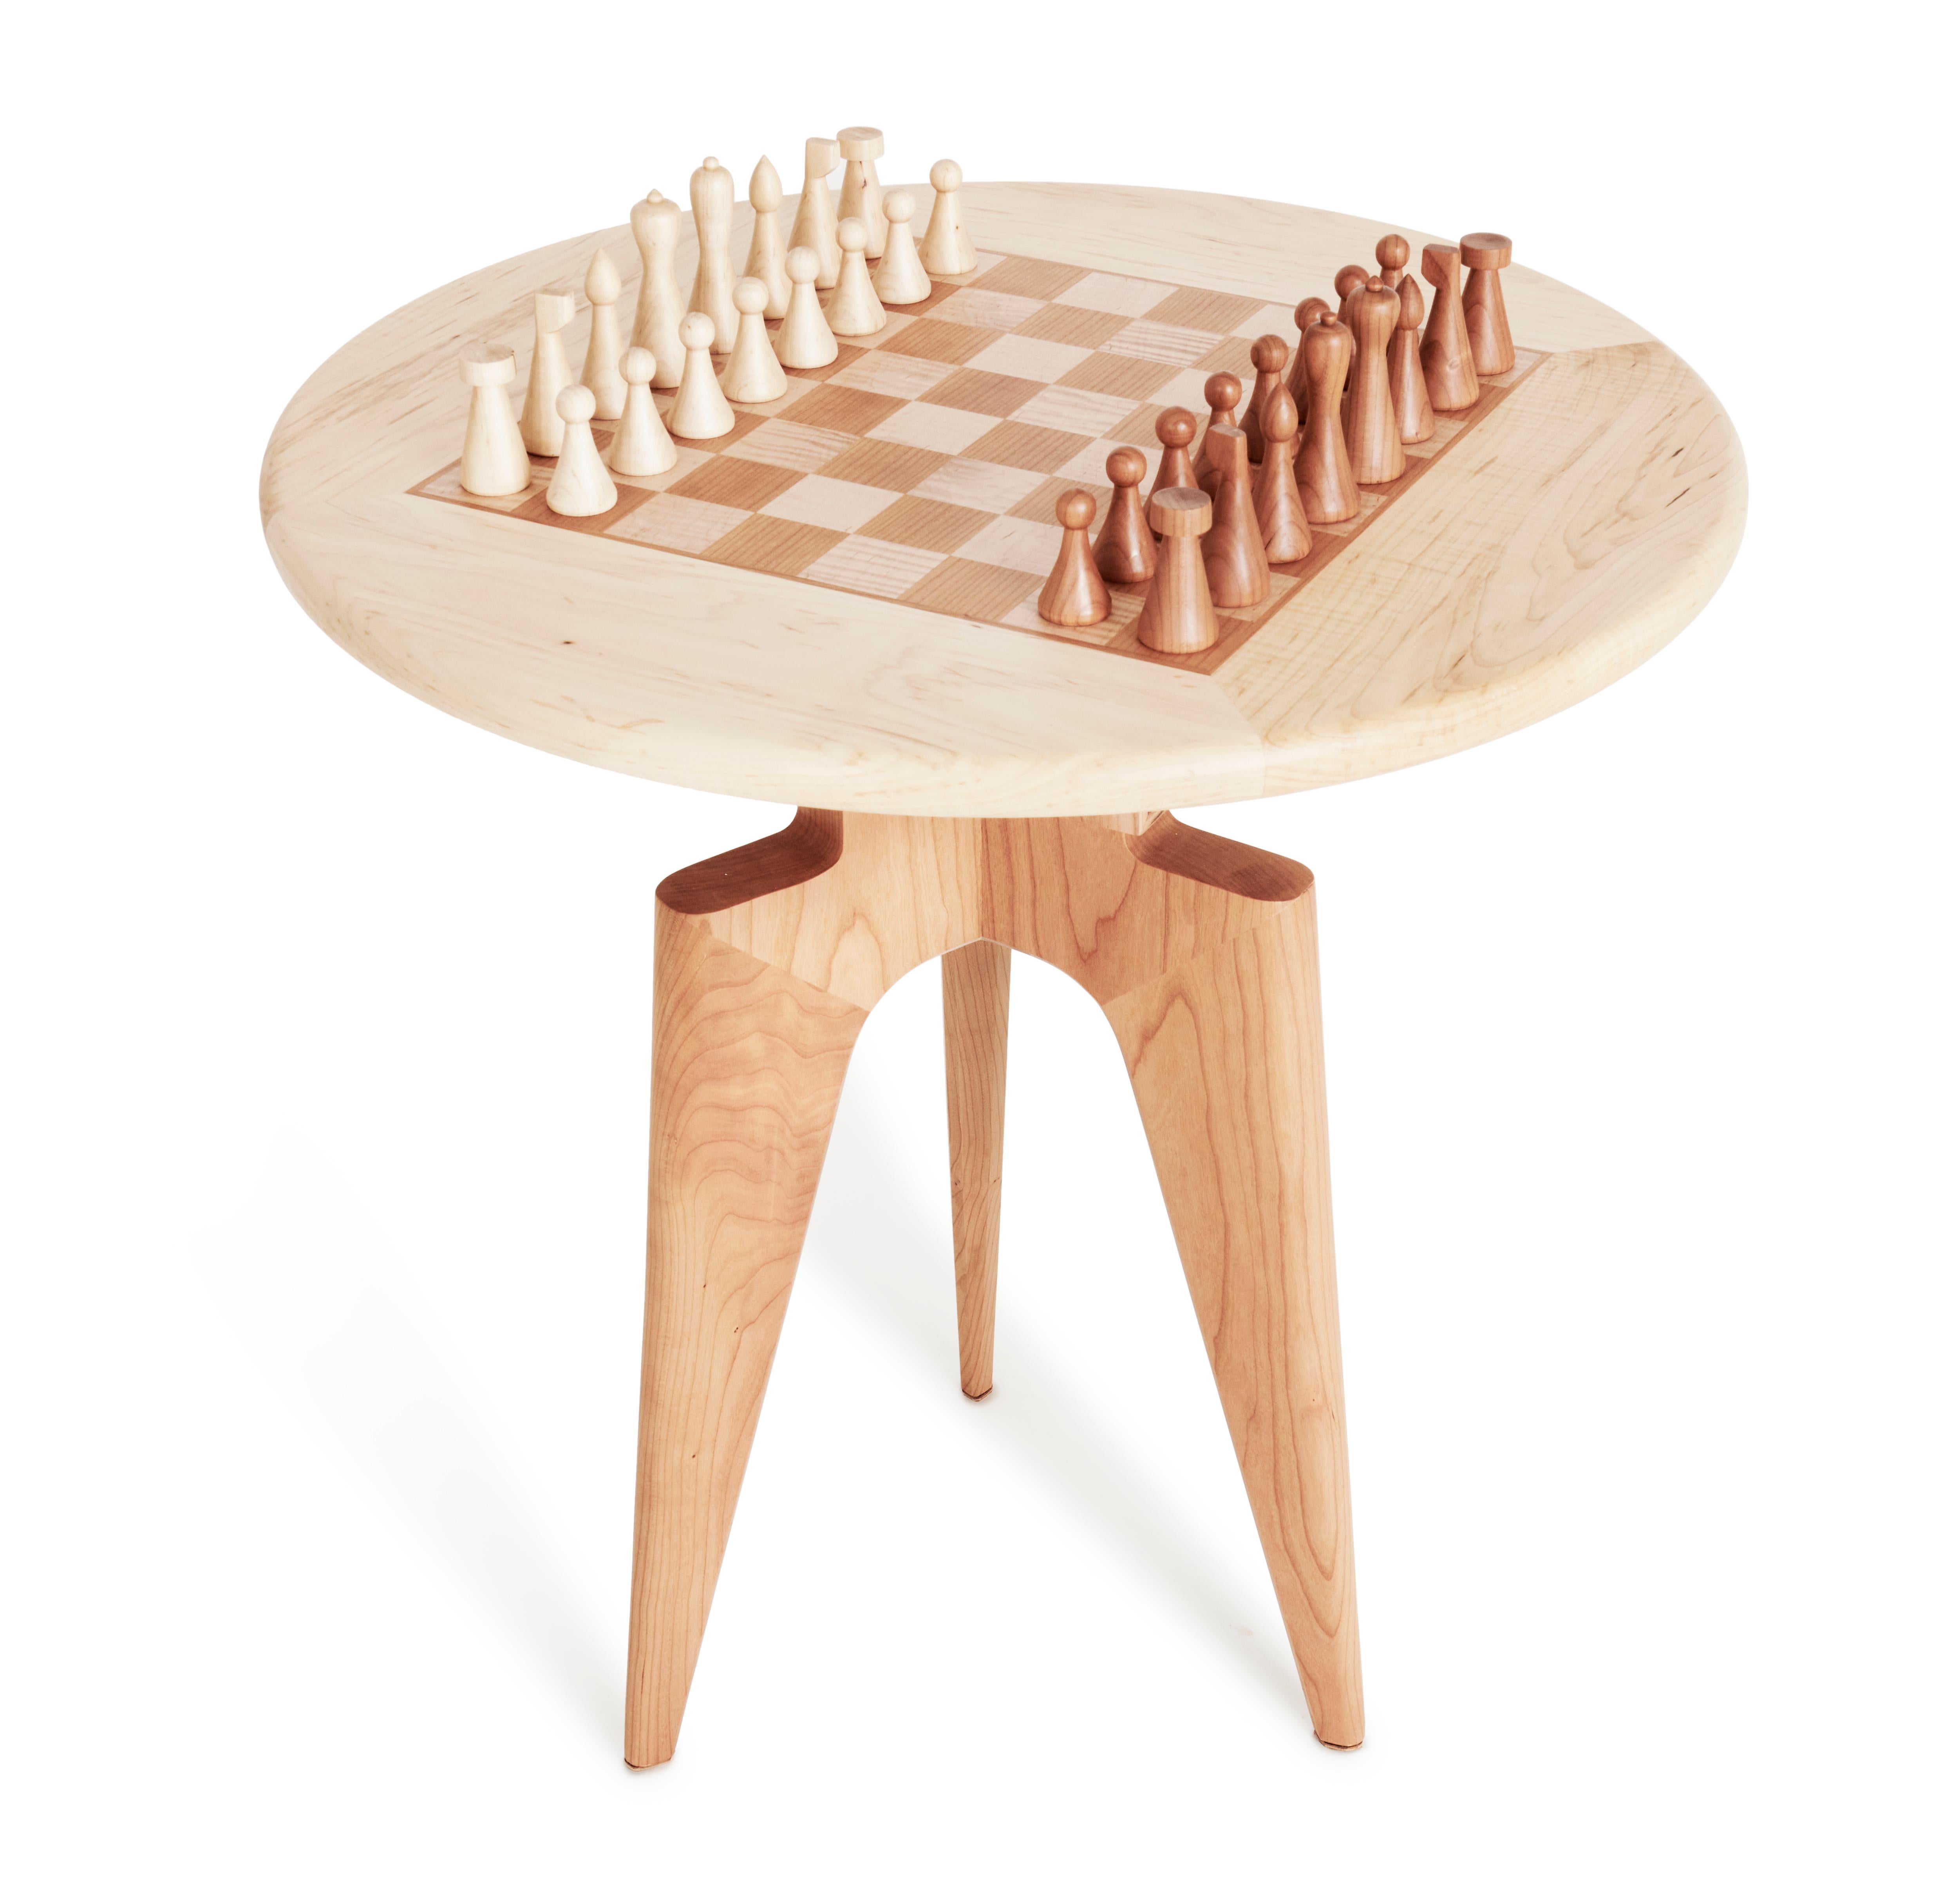 South African Wood Porn - A Wildly Classy Chess Set (Cherry and Maple) For Sale